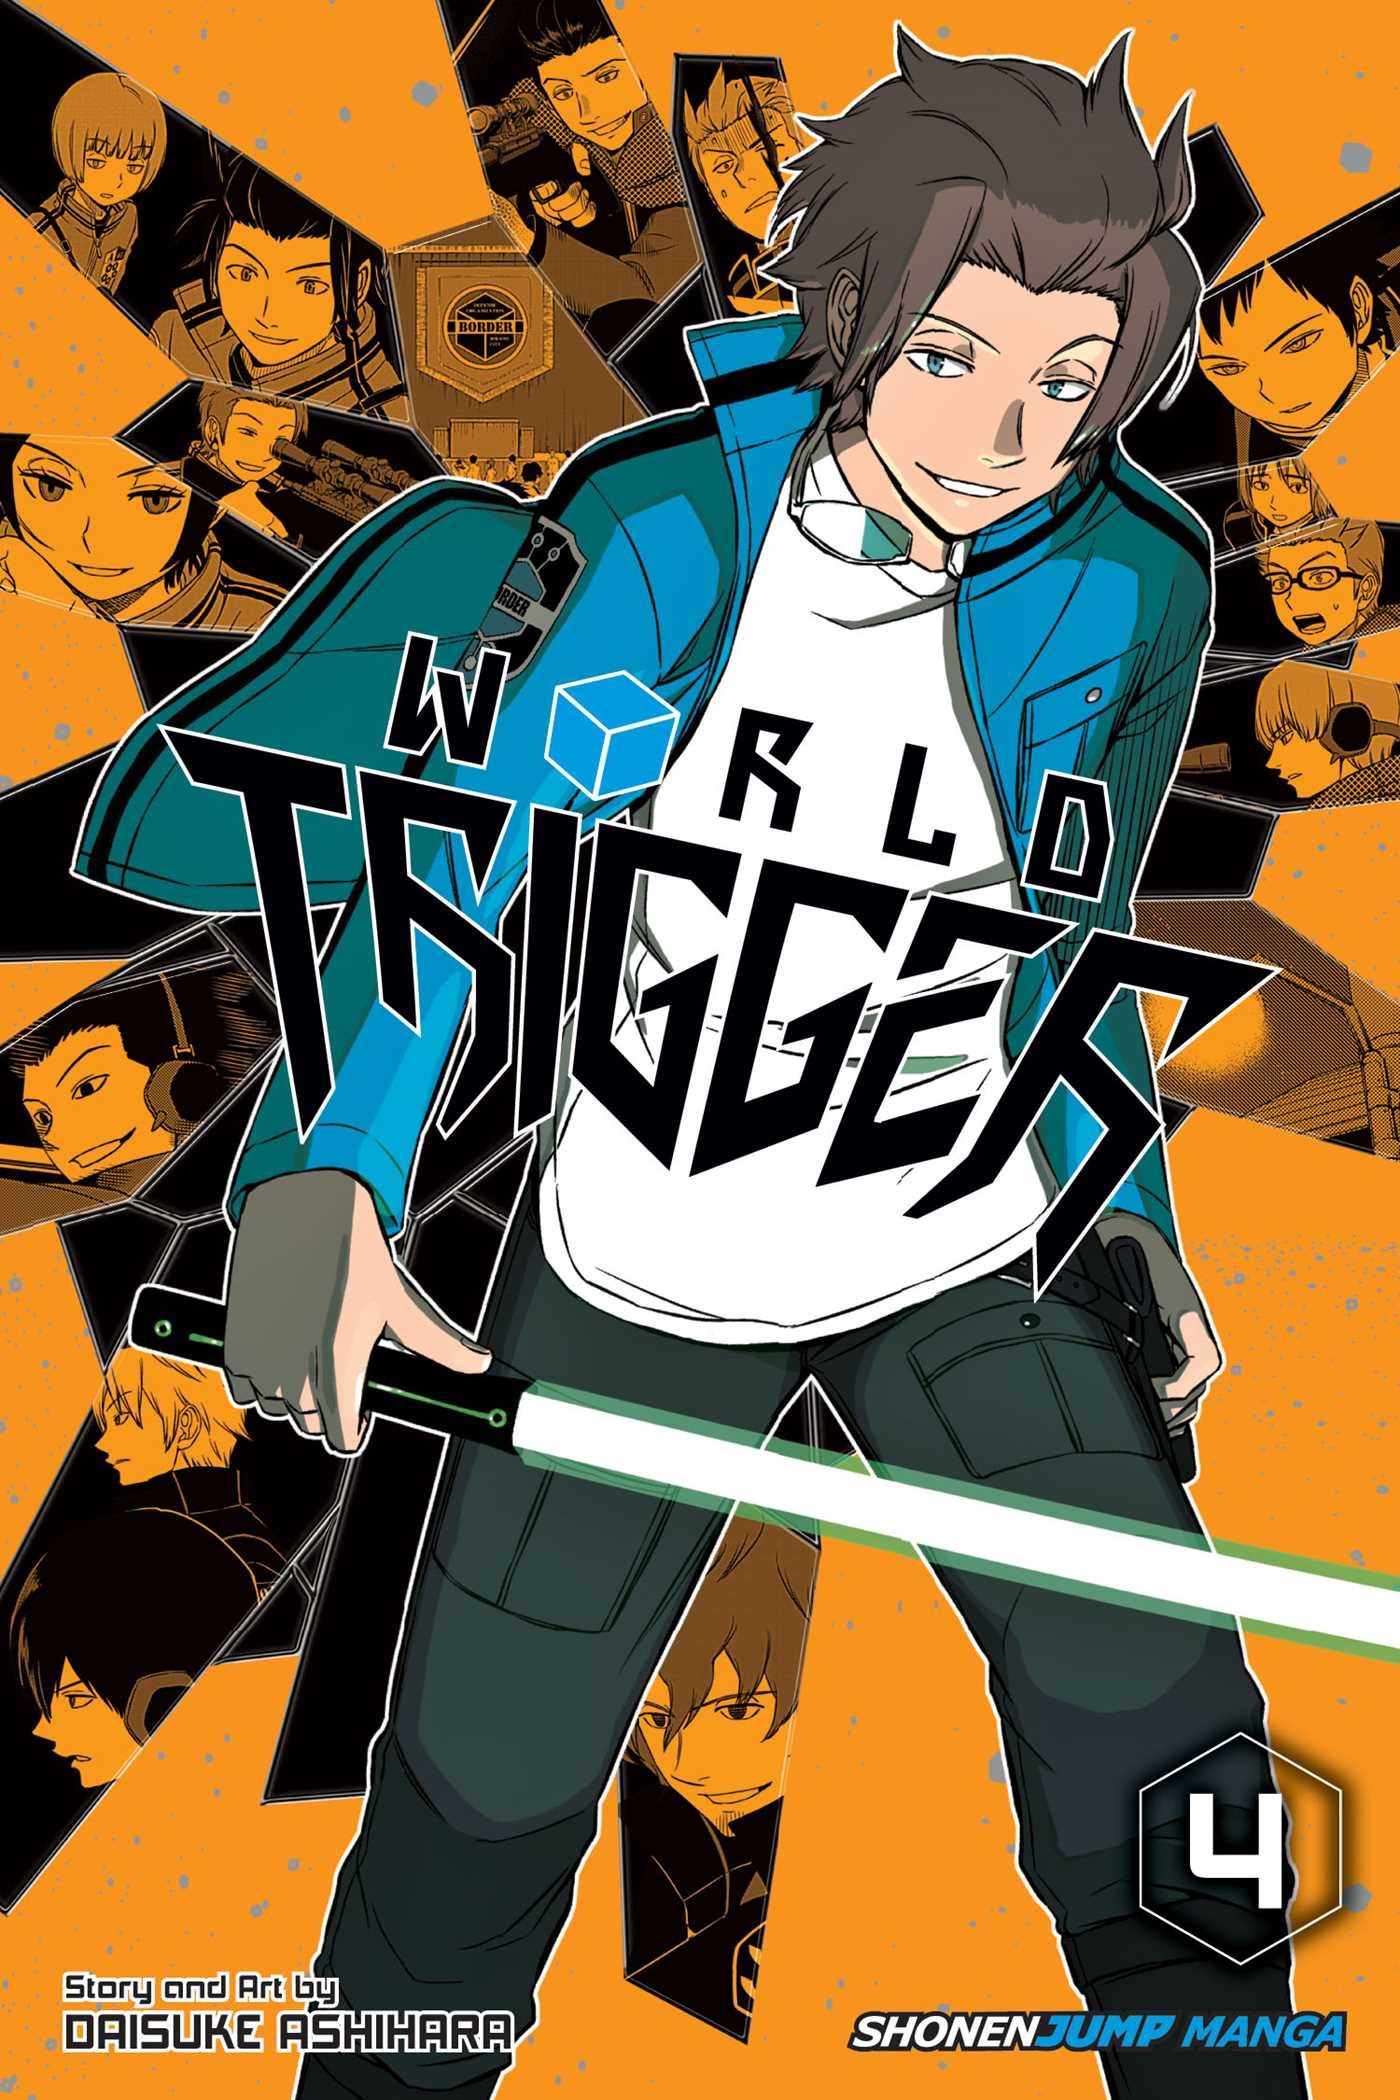 World Trigger is back after of almost 2 Years in Indefinite Hiatus